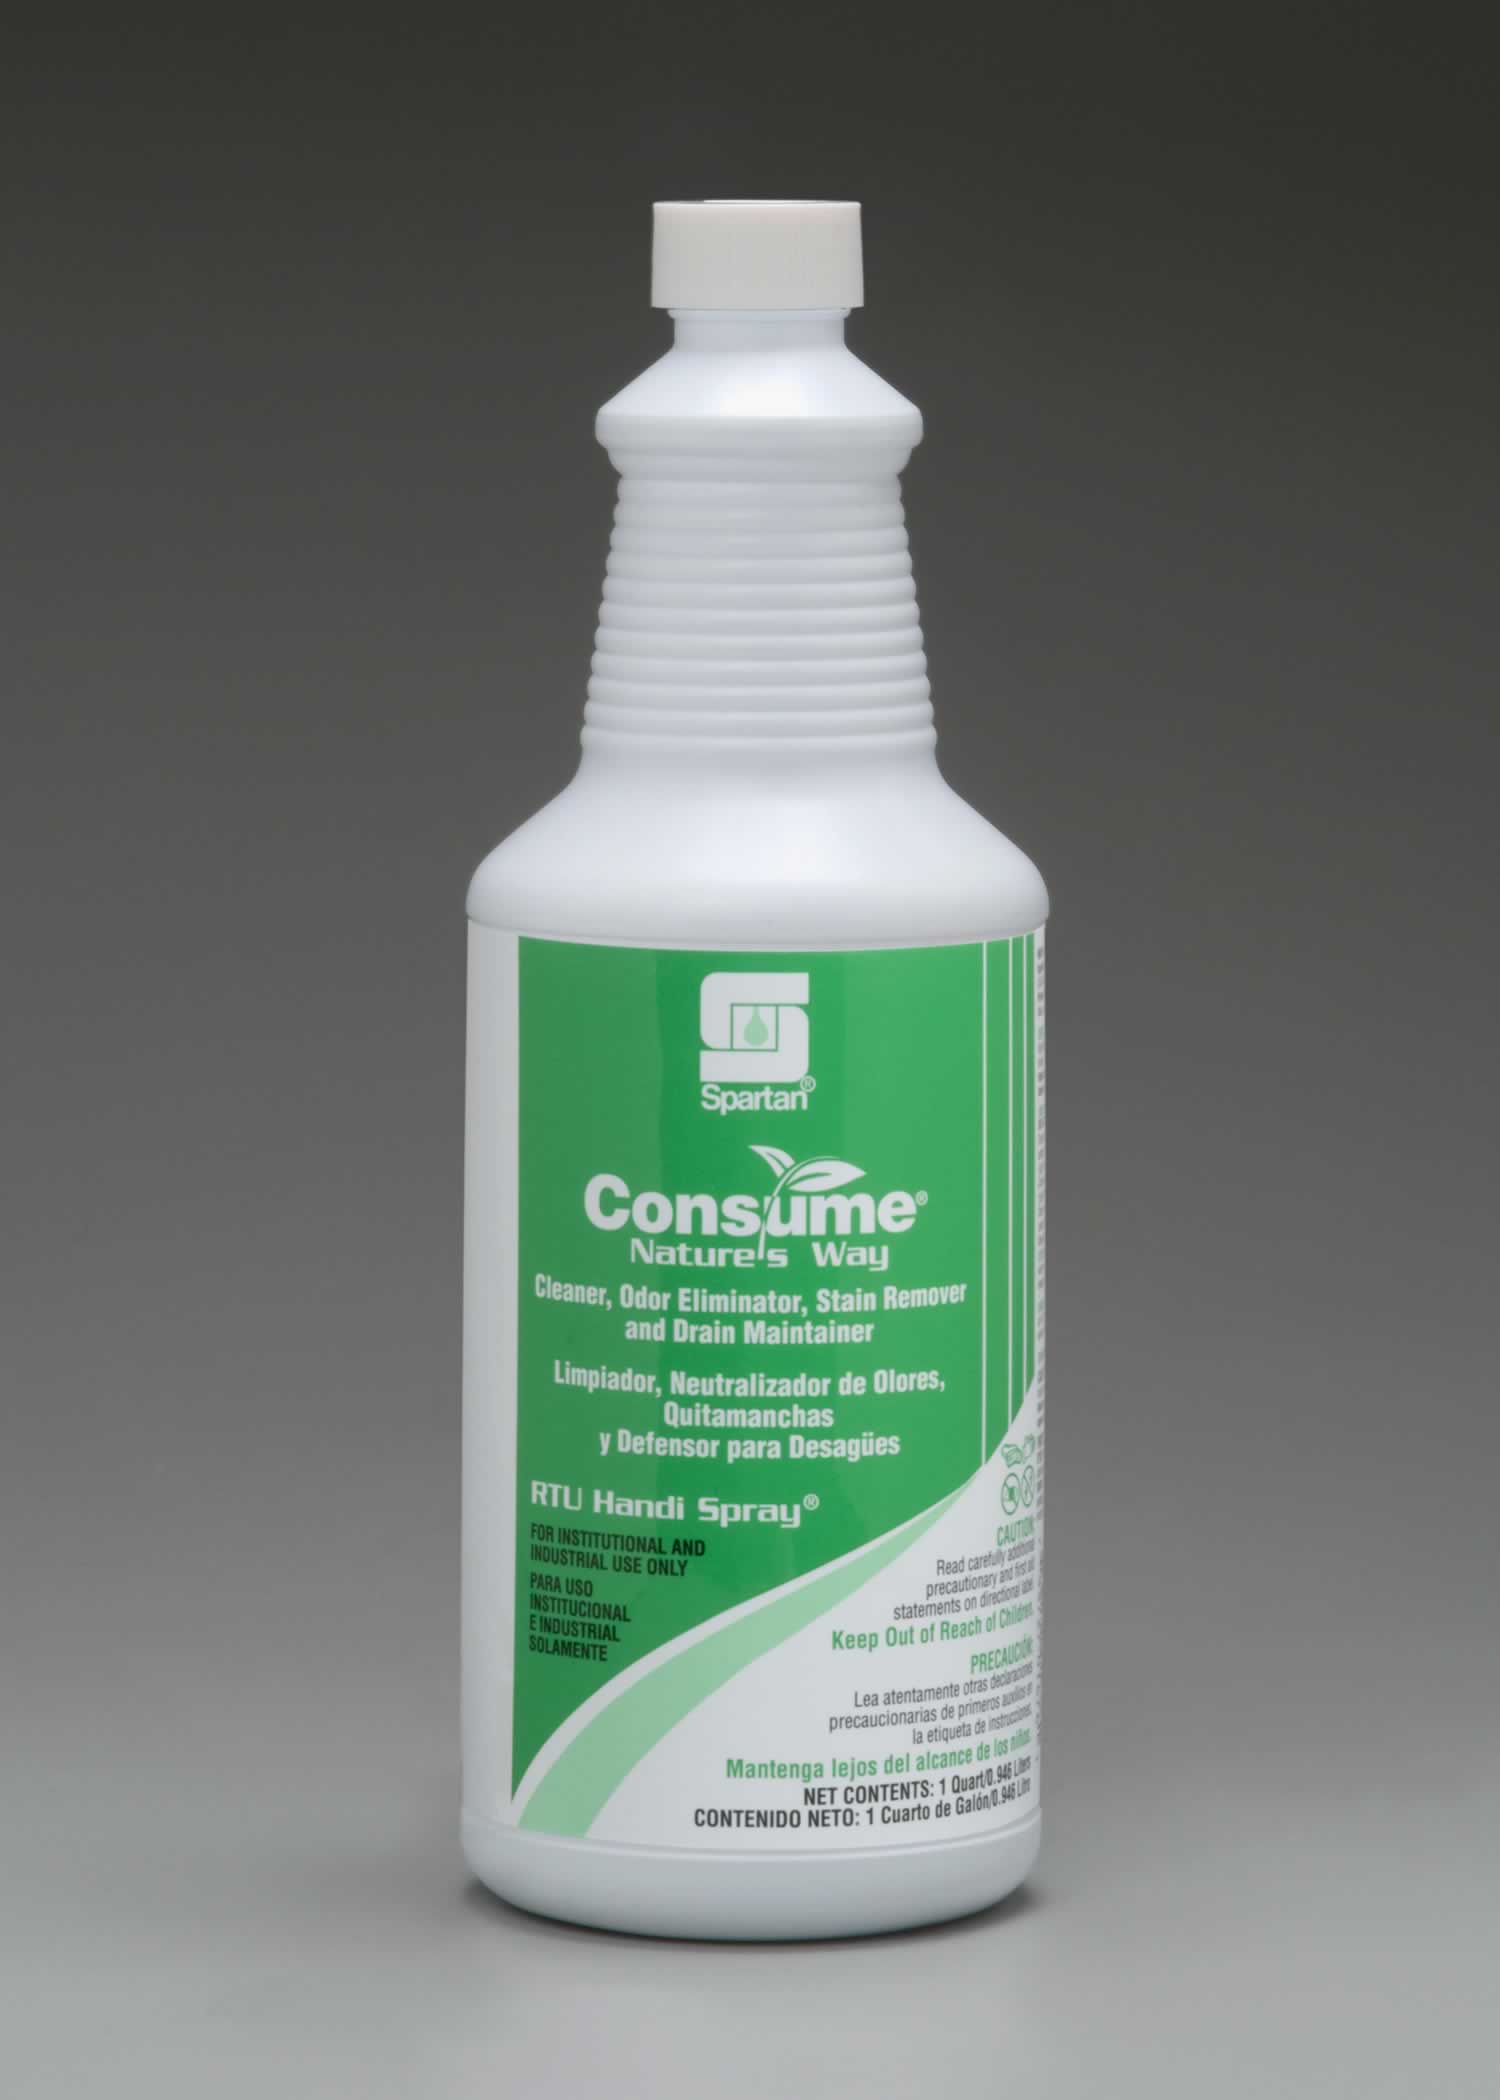 Consume cleaner, odor eliminator, stain remover, and drain maintainer with natural digesters